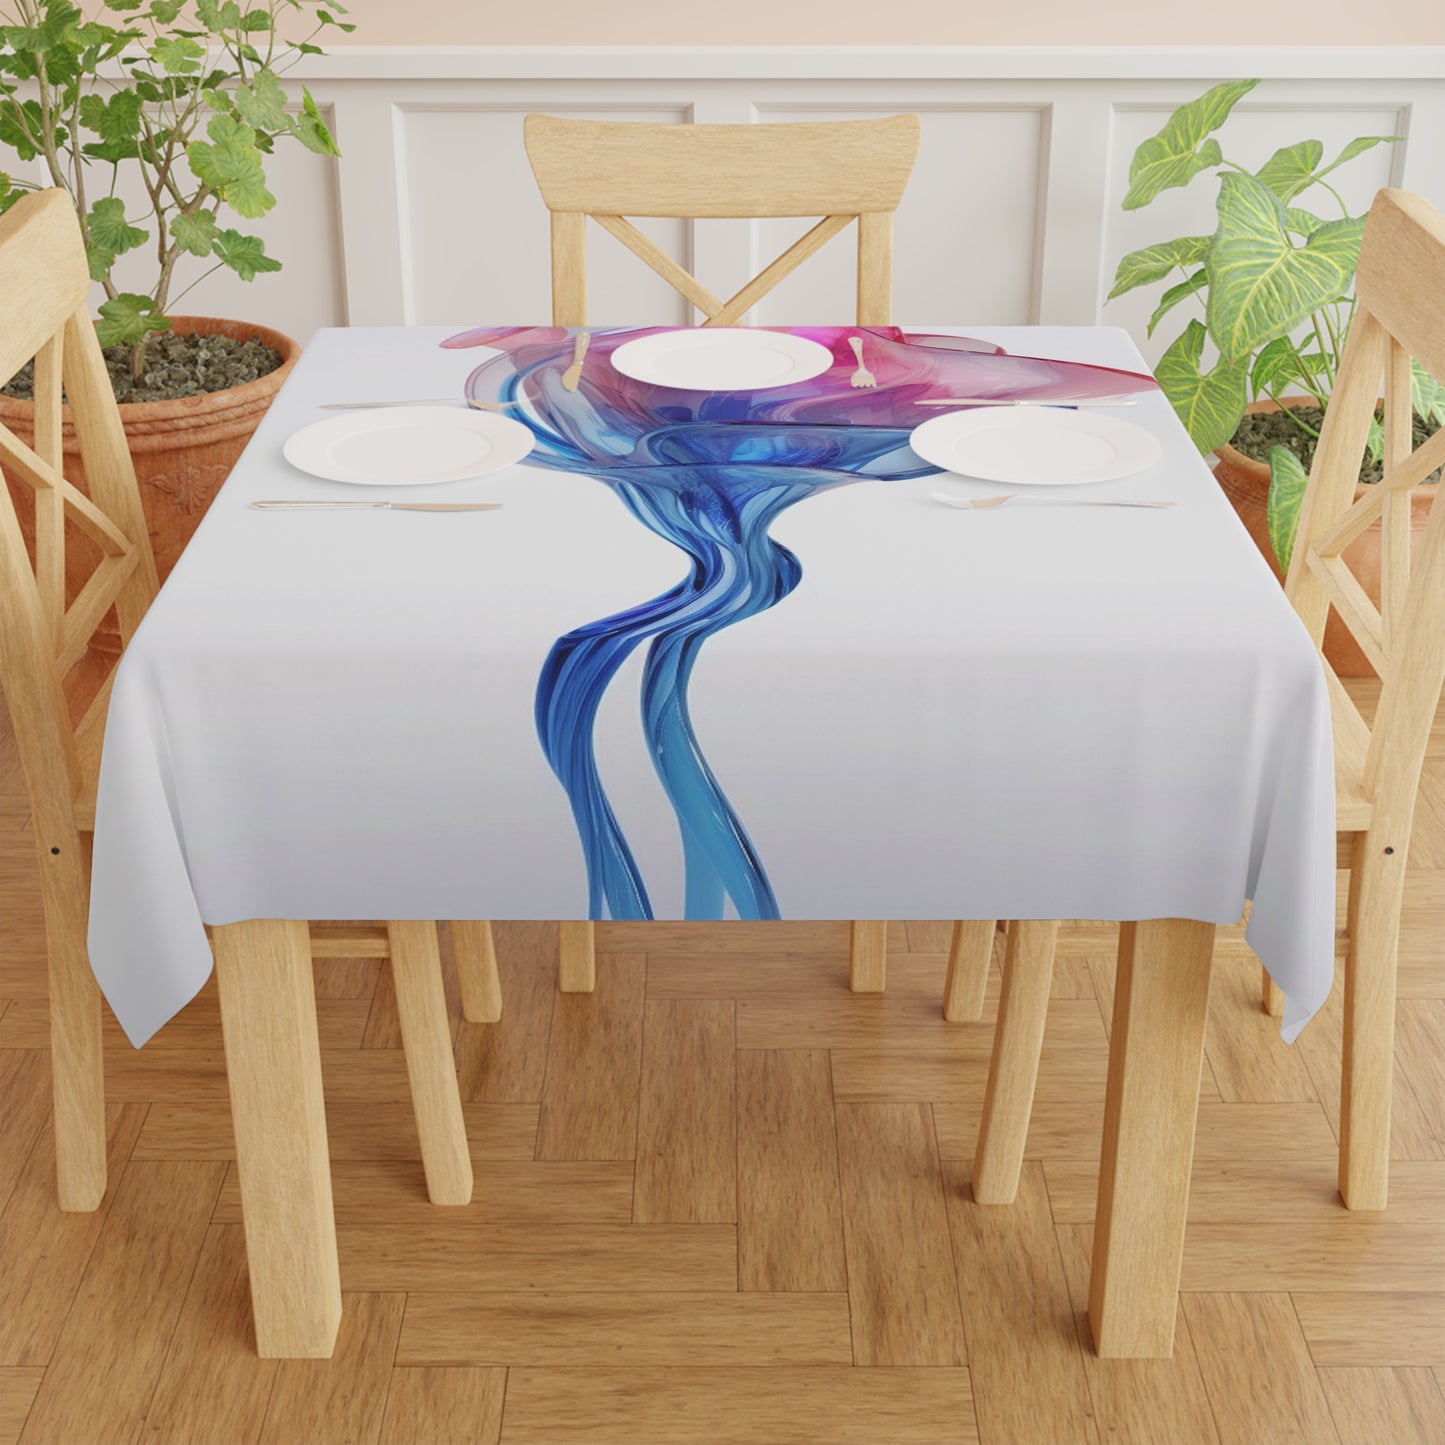 Tablecloth Pink & Blue Tulip Rose 4